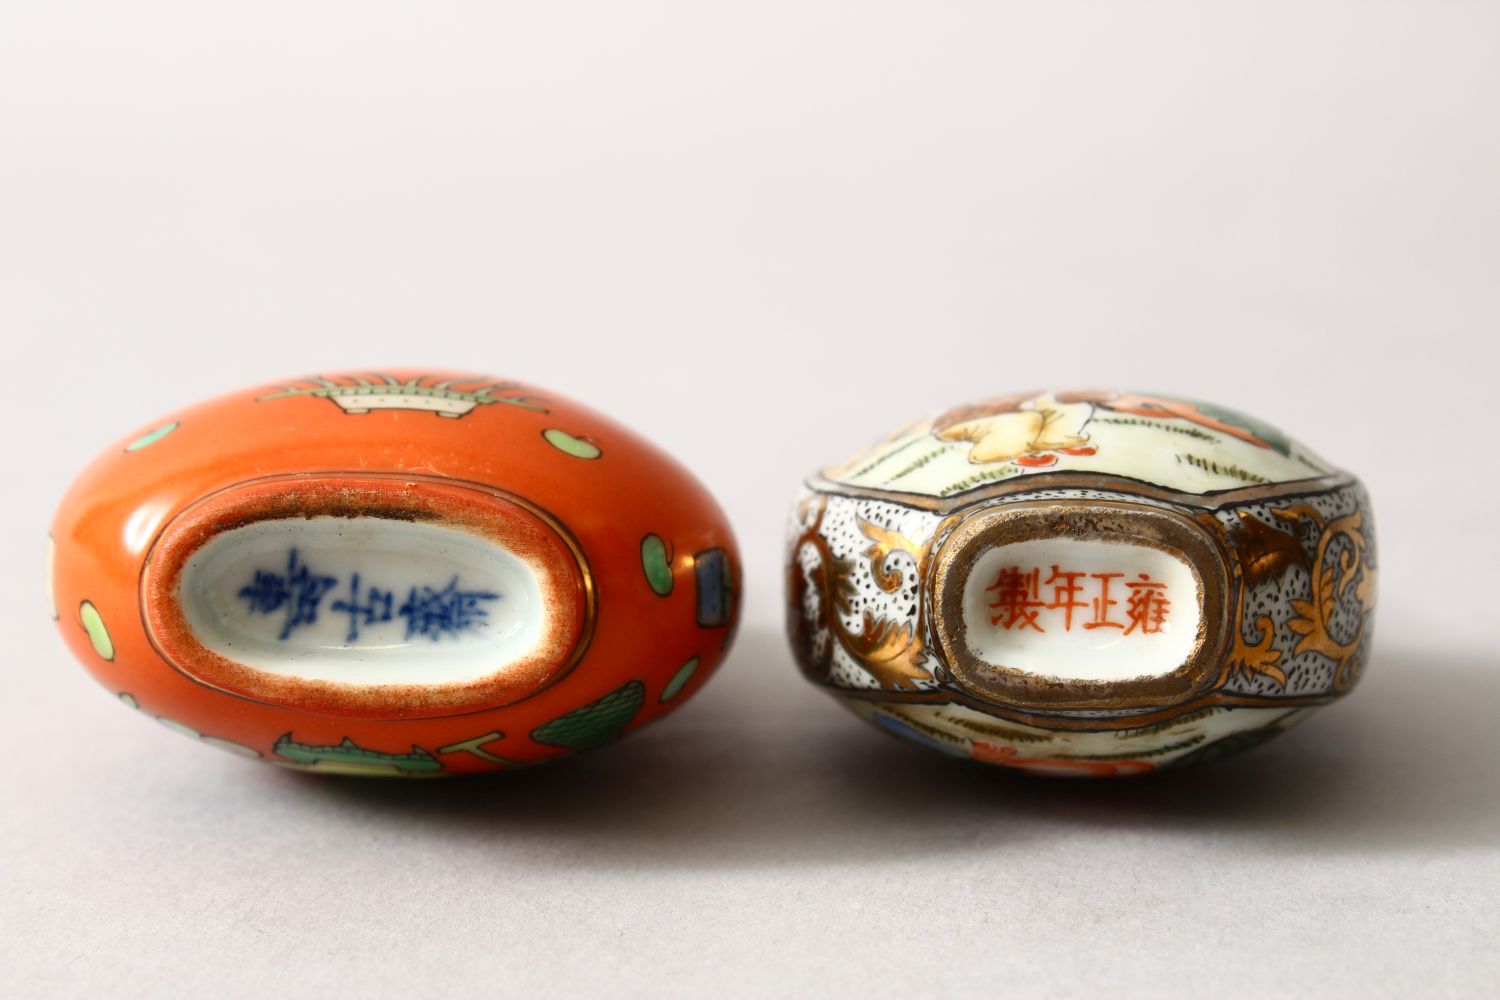 TWO 19TH / 20TH CENTURY CHINESE FAMILLE ROSE PORCELAIN SNUFF BOTTLES, one with a coral red ground - Image 7 of 8